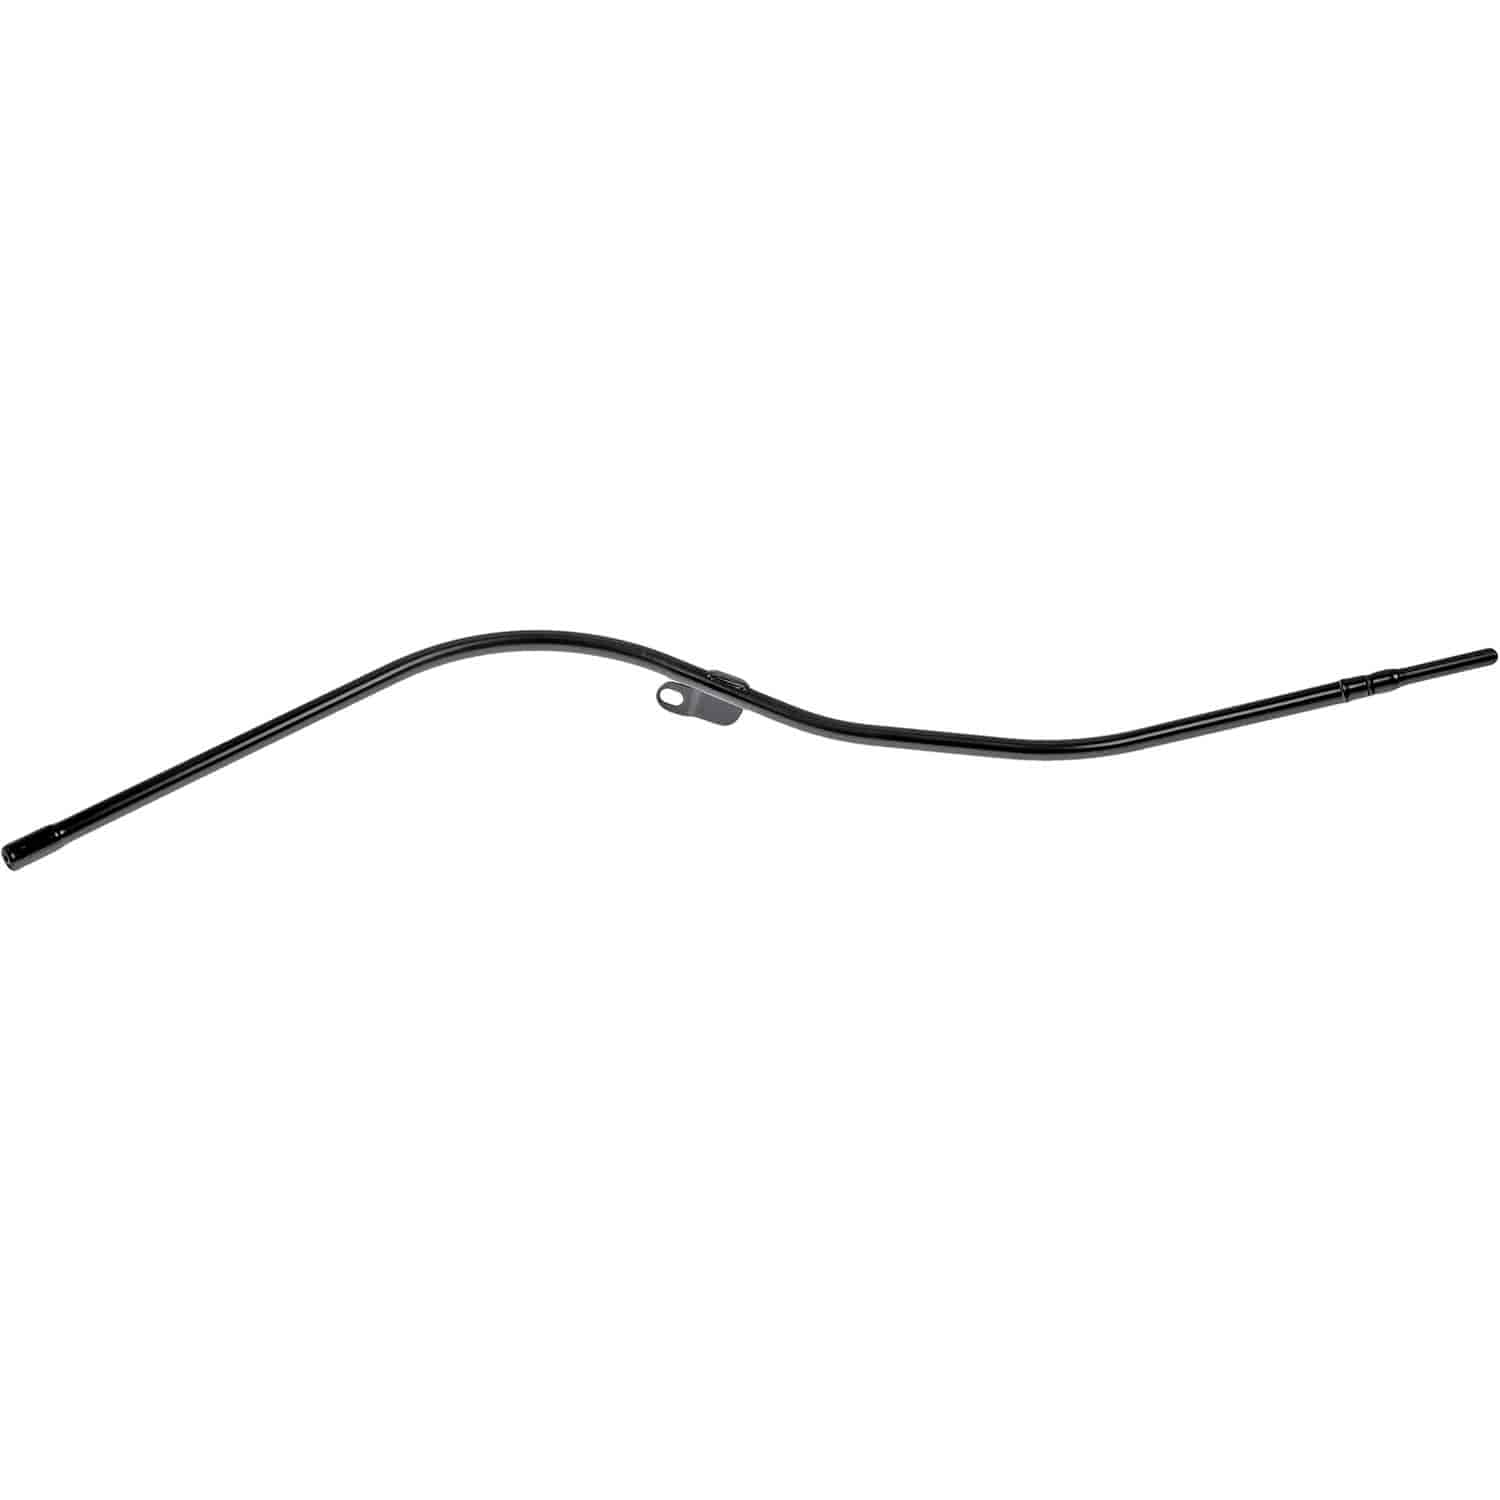 Engine Oil Dipstick Tube for 1998-2005 Ford Excursion,